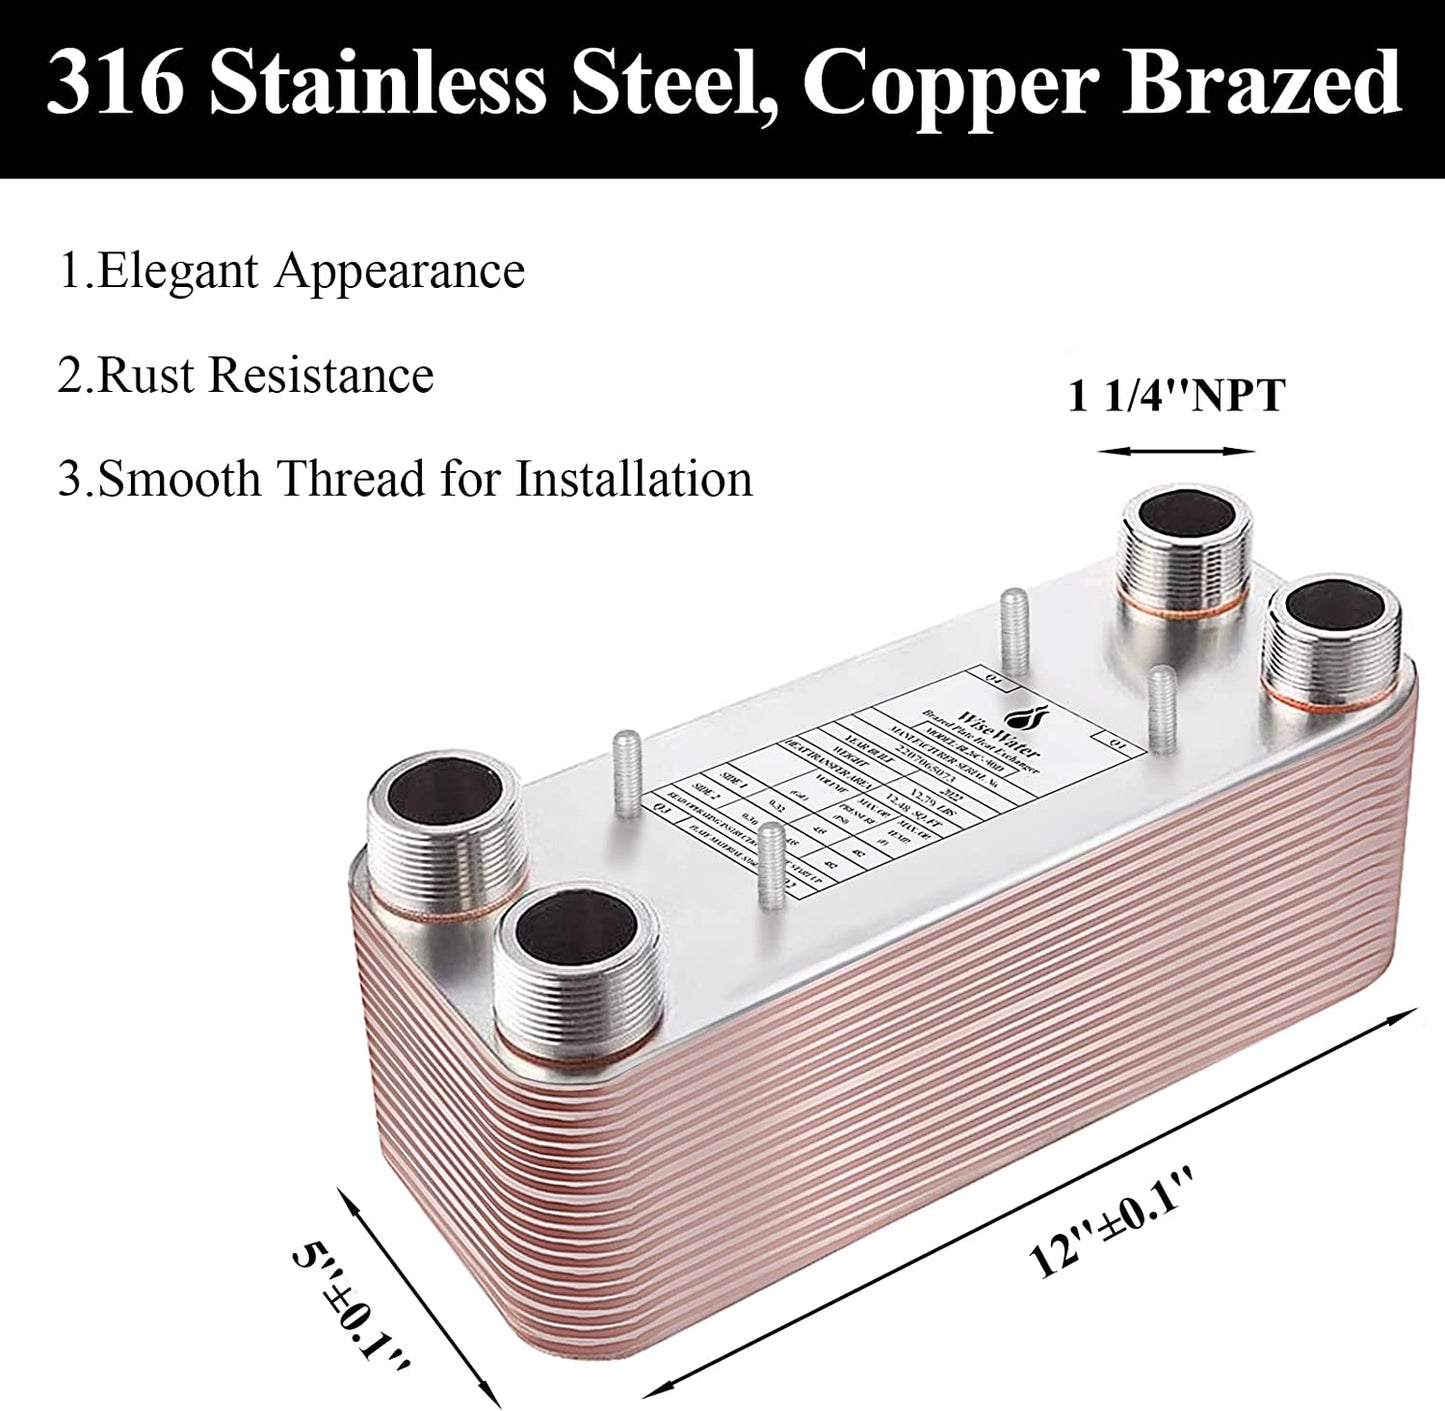 Plate Heat Exchanger, 5"X 12" 40 Plates Water to Water Heat Exchanger, Copper/Ss316L Stainless Steel Brazed Plate Heat Exchanger for Floor Heating, Water Heating, Snow Melting